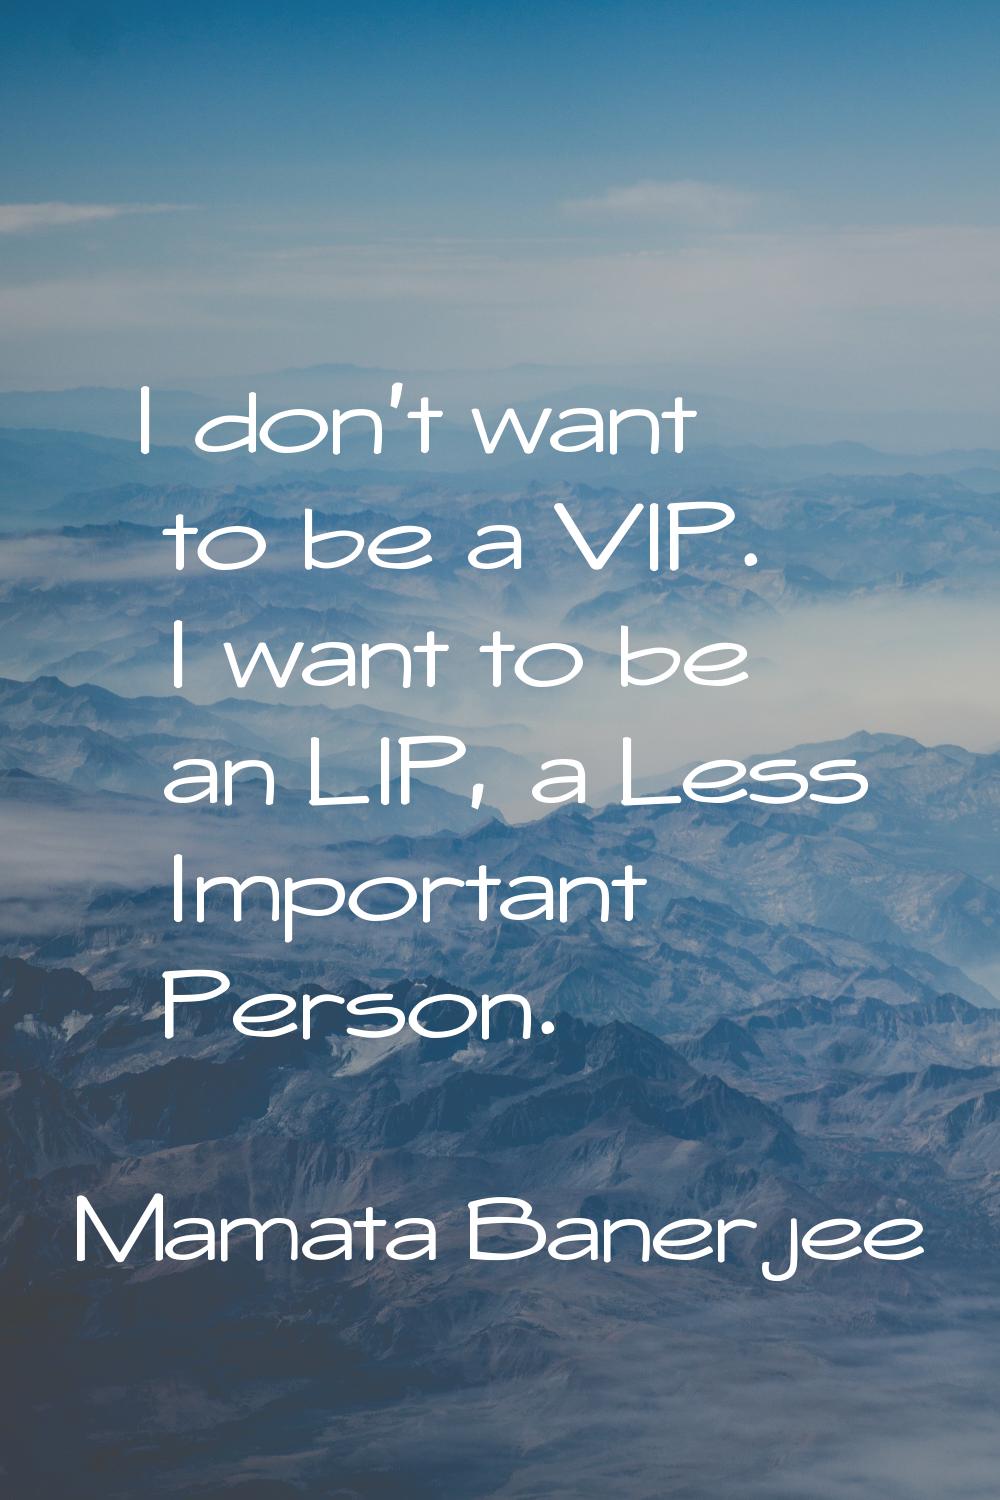 I don't want to be a VIP. I want to be an LIP, a Less Important Person.